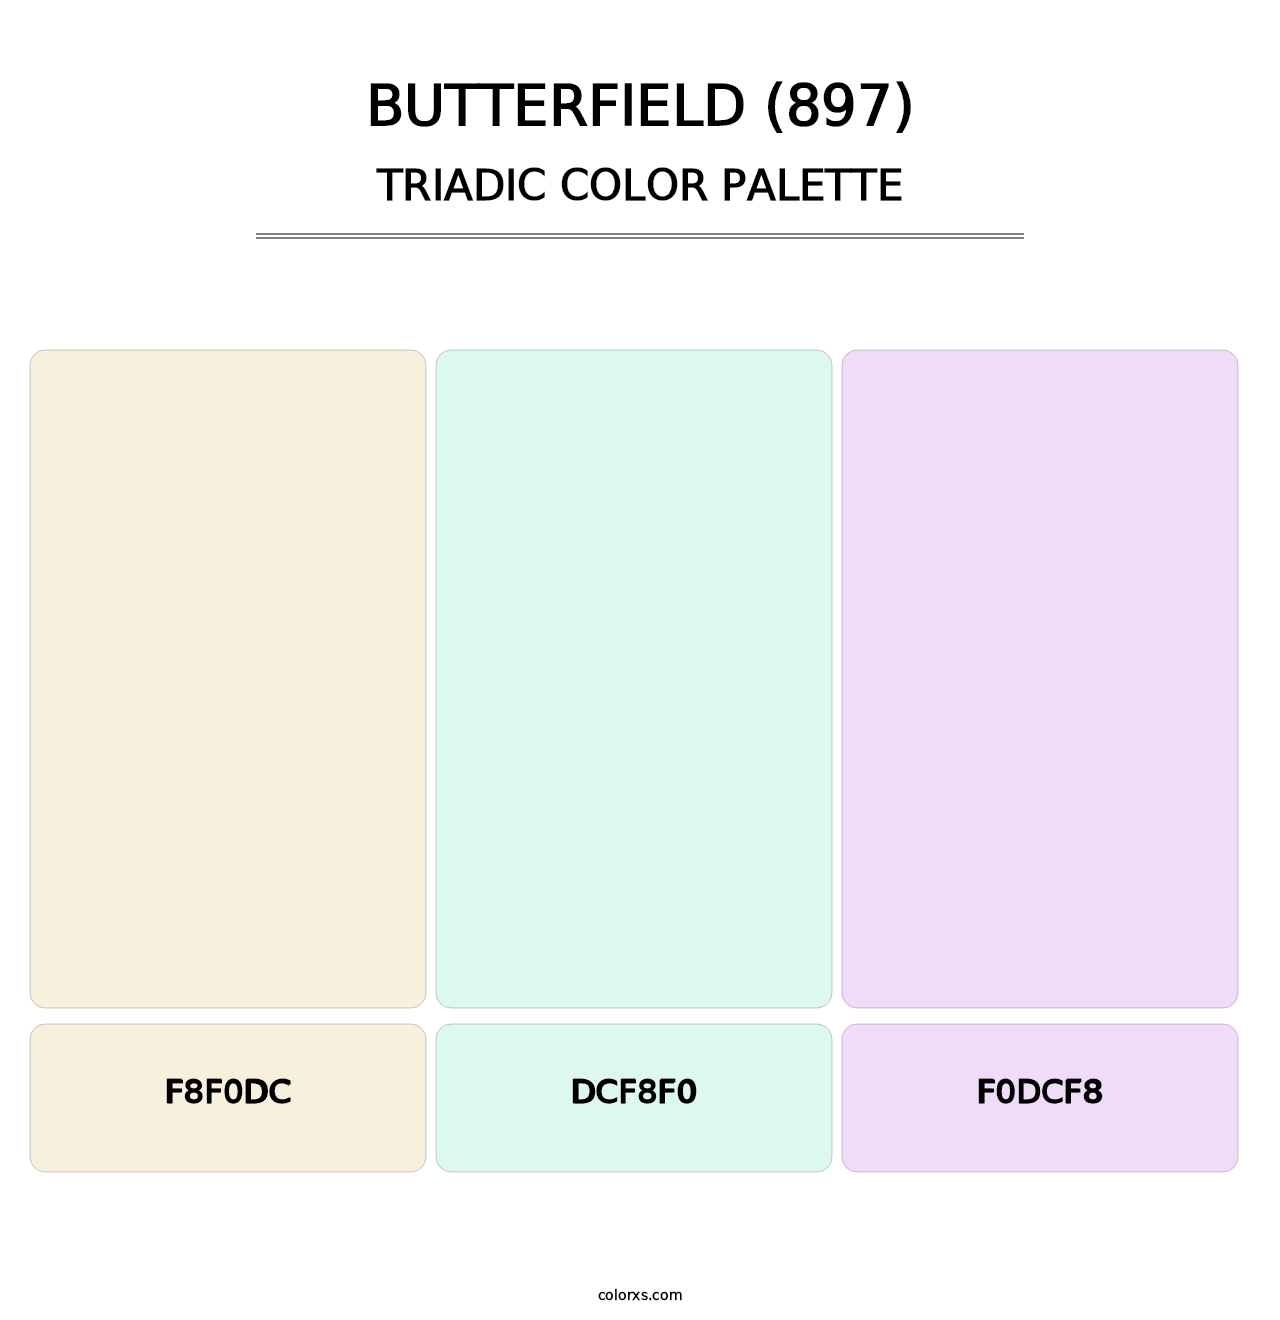 Butterfield (897) - Triadic Color Palette